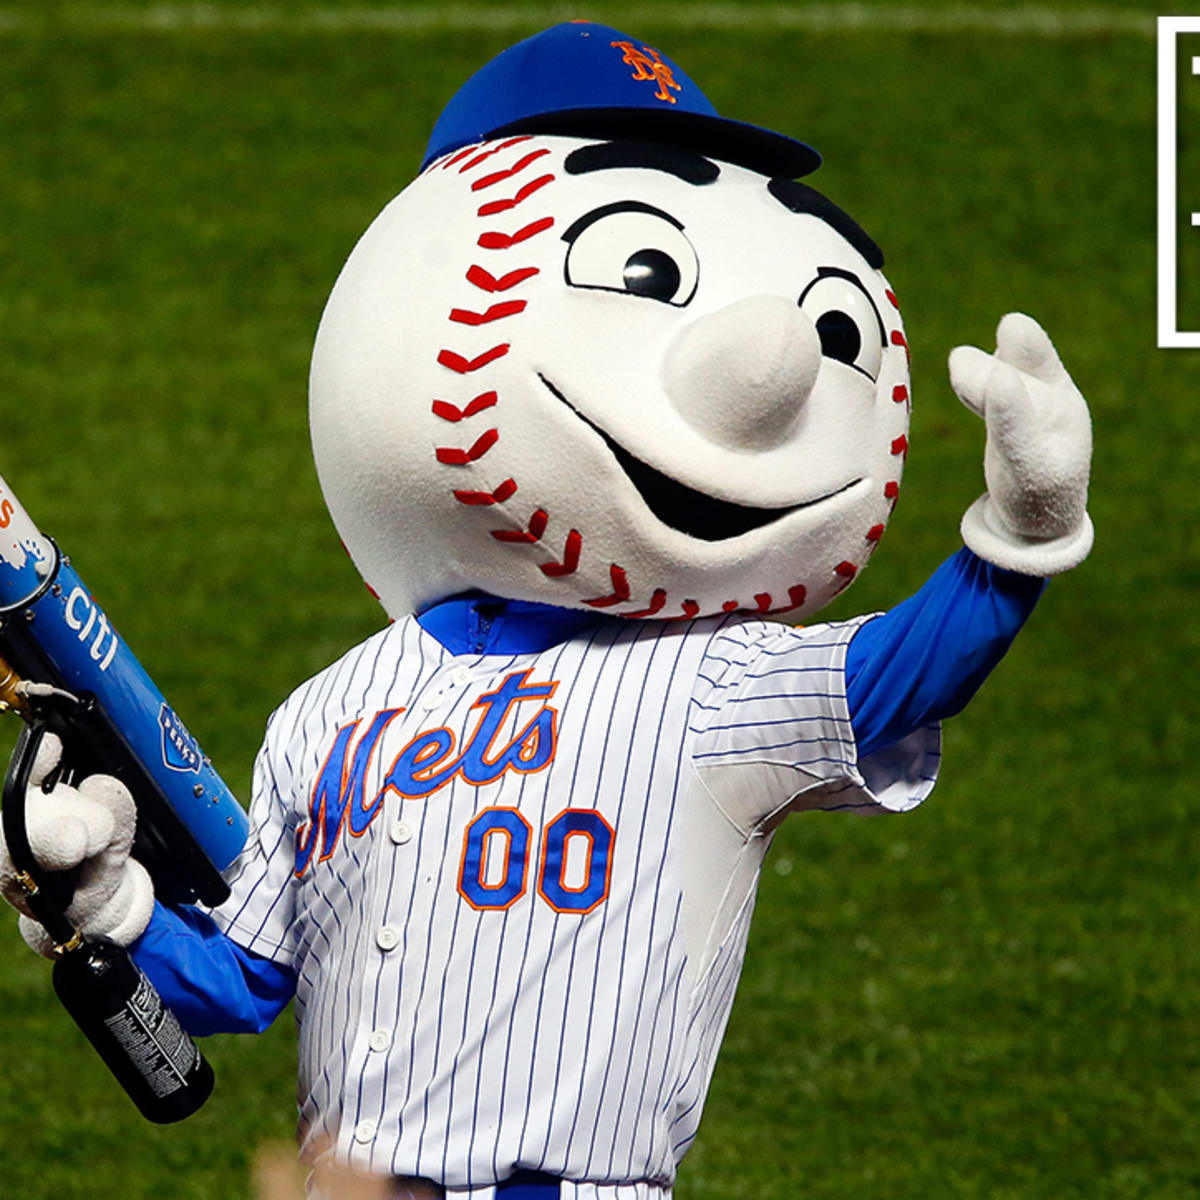 Mr. Met fired: Mascot canned after flipping off fan - Sports